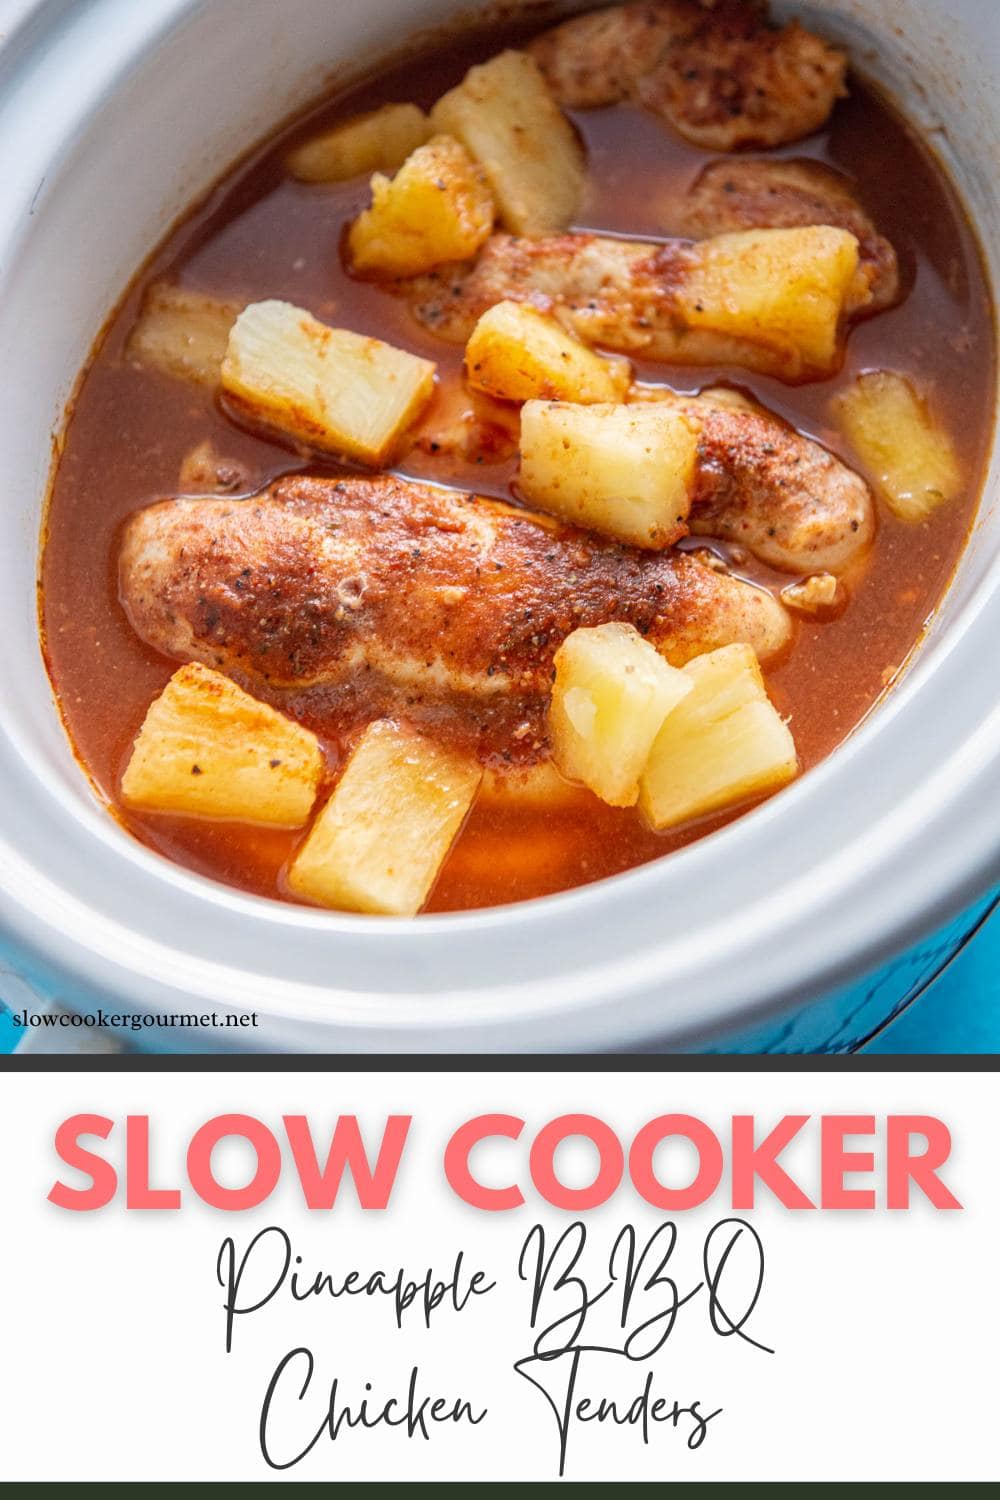 slow cooker pineapple bbq chicken tenders inside of slow cooker cooked